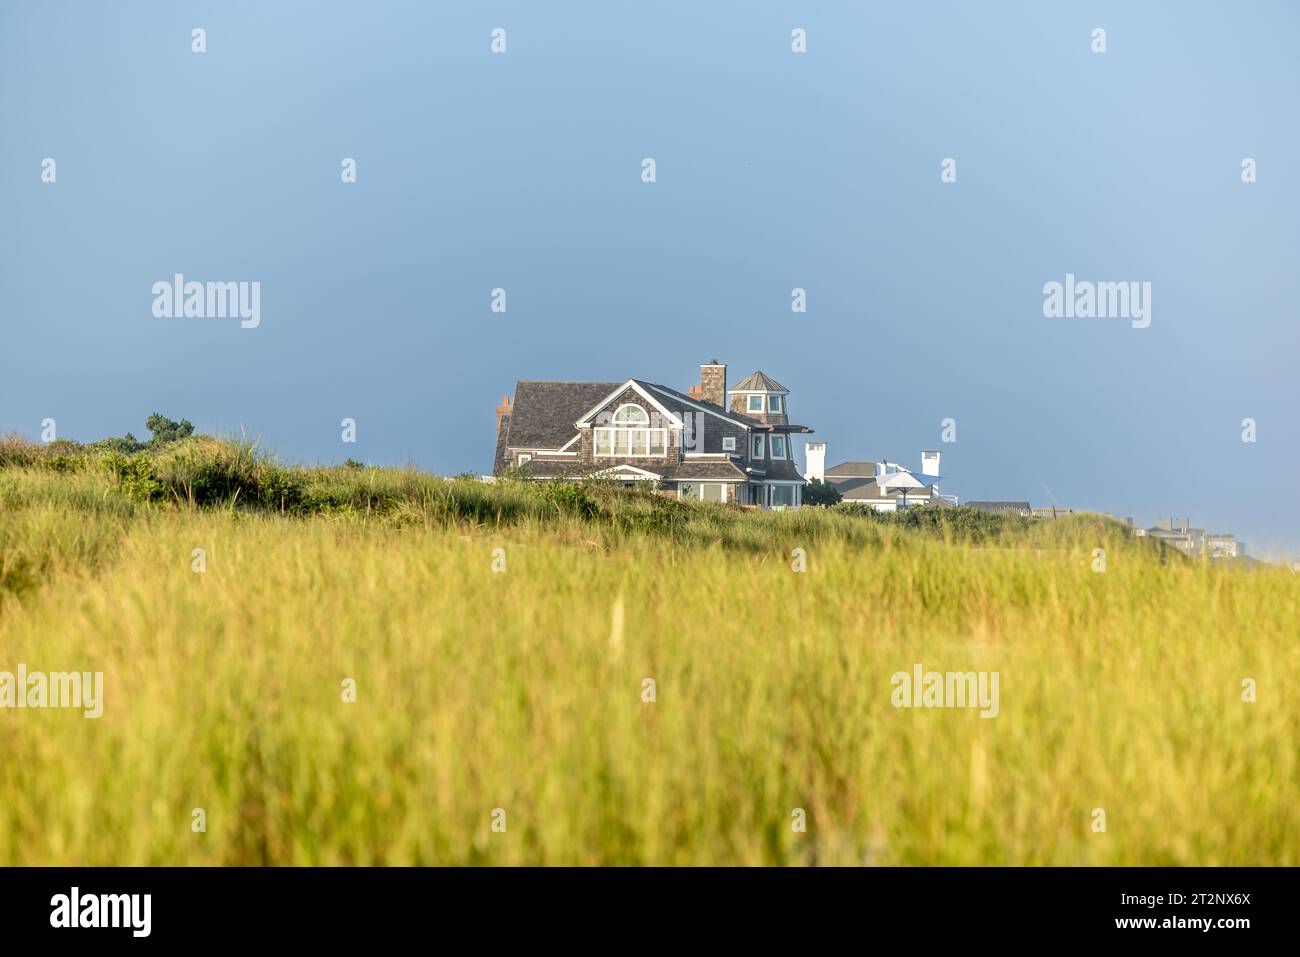 Large water front home in sagaponack, ny Stock Photo